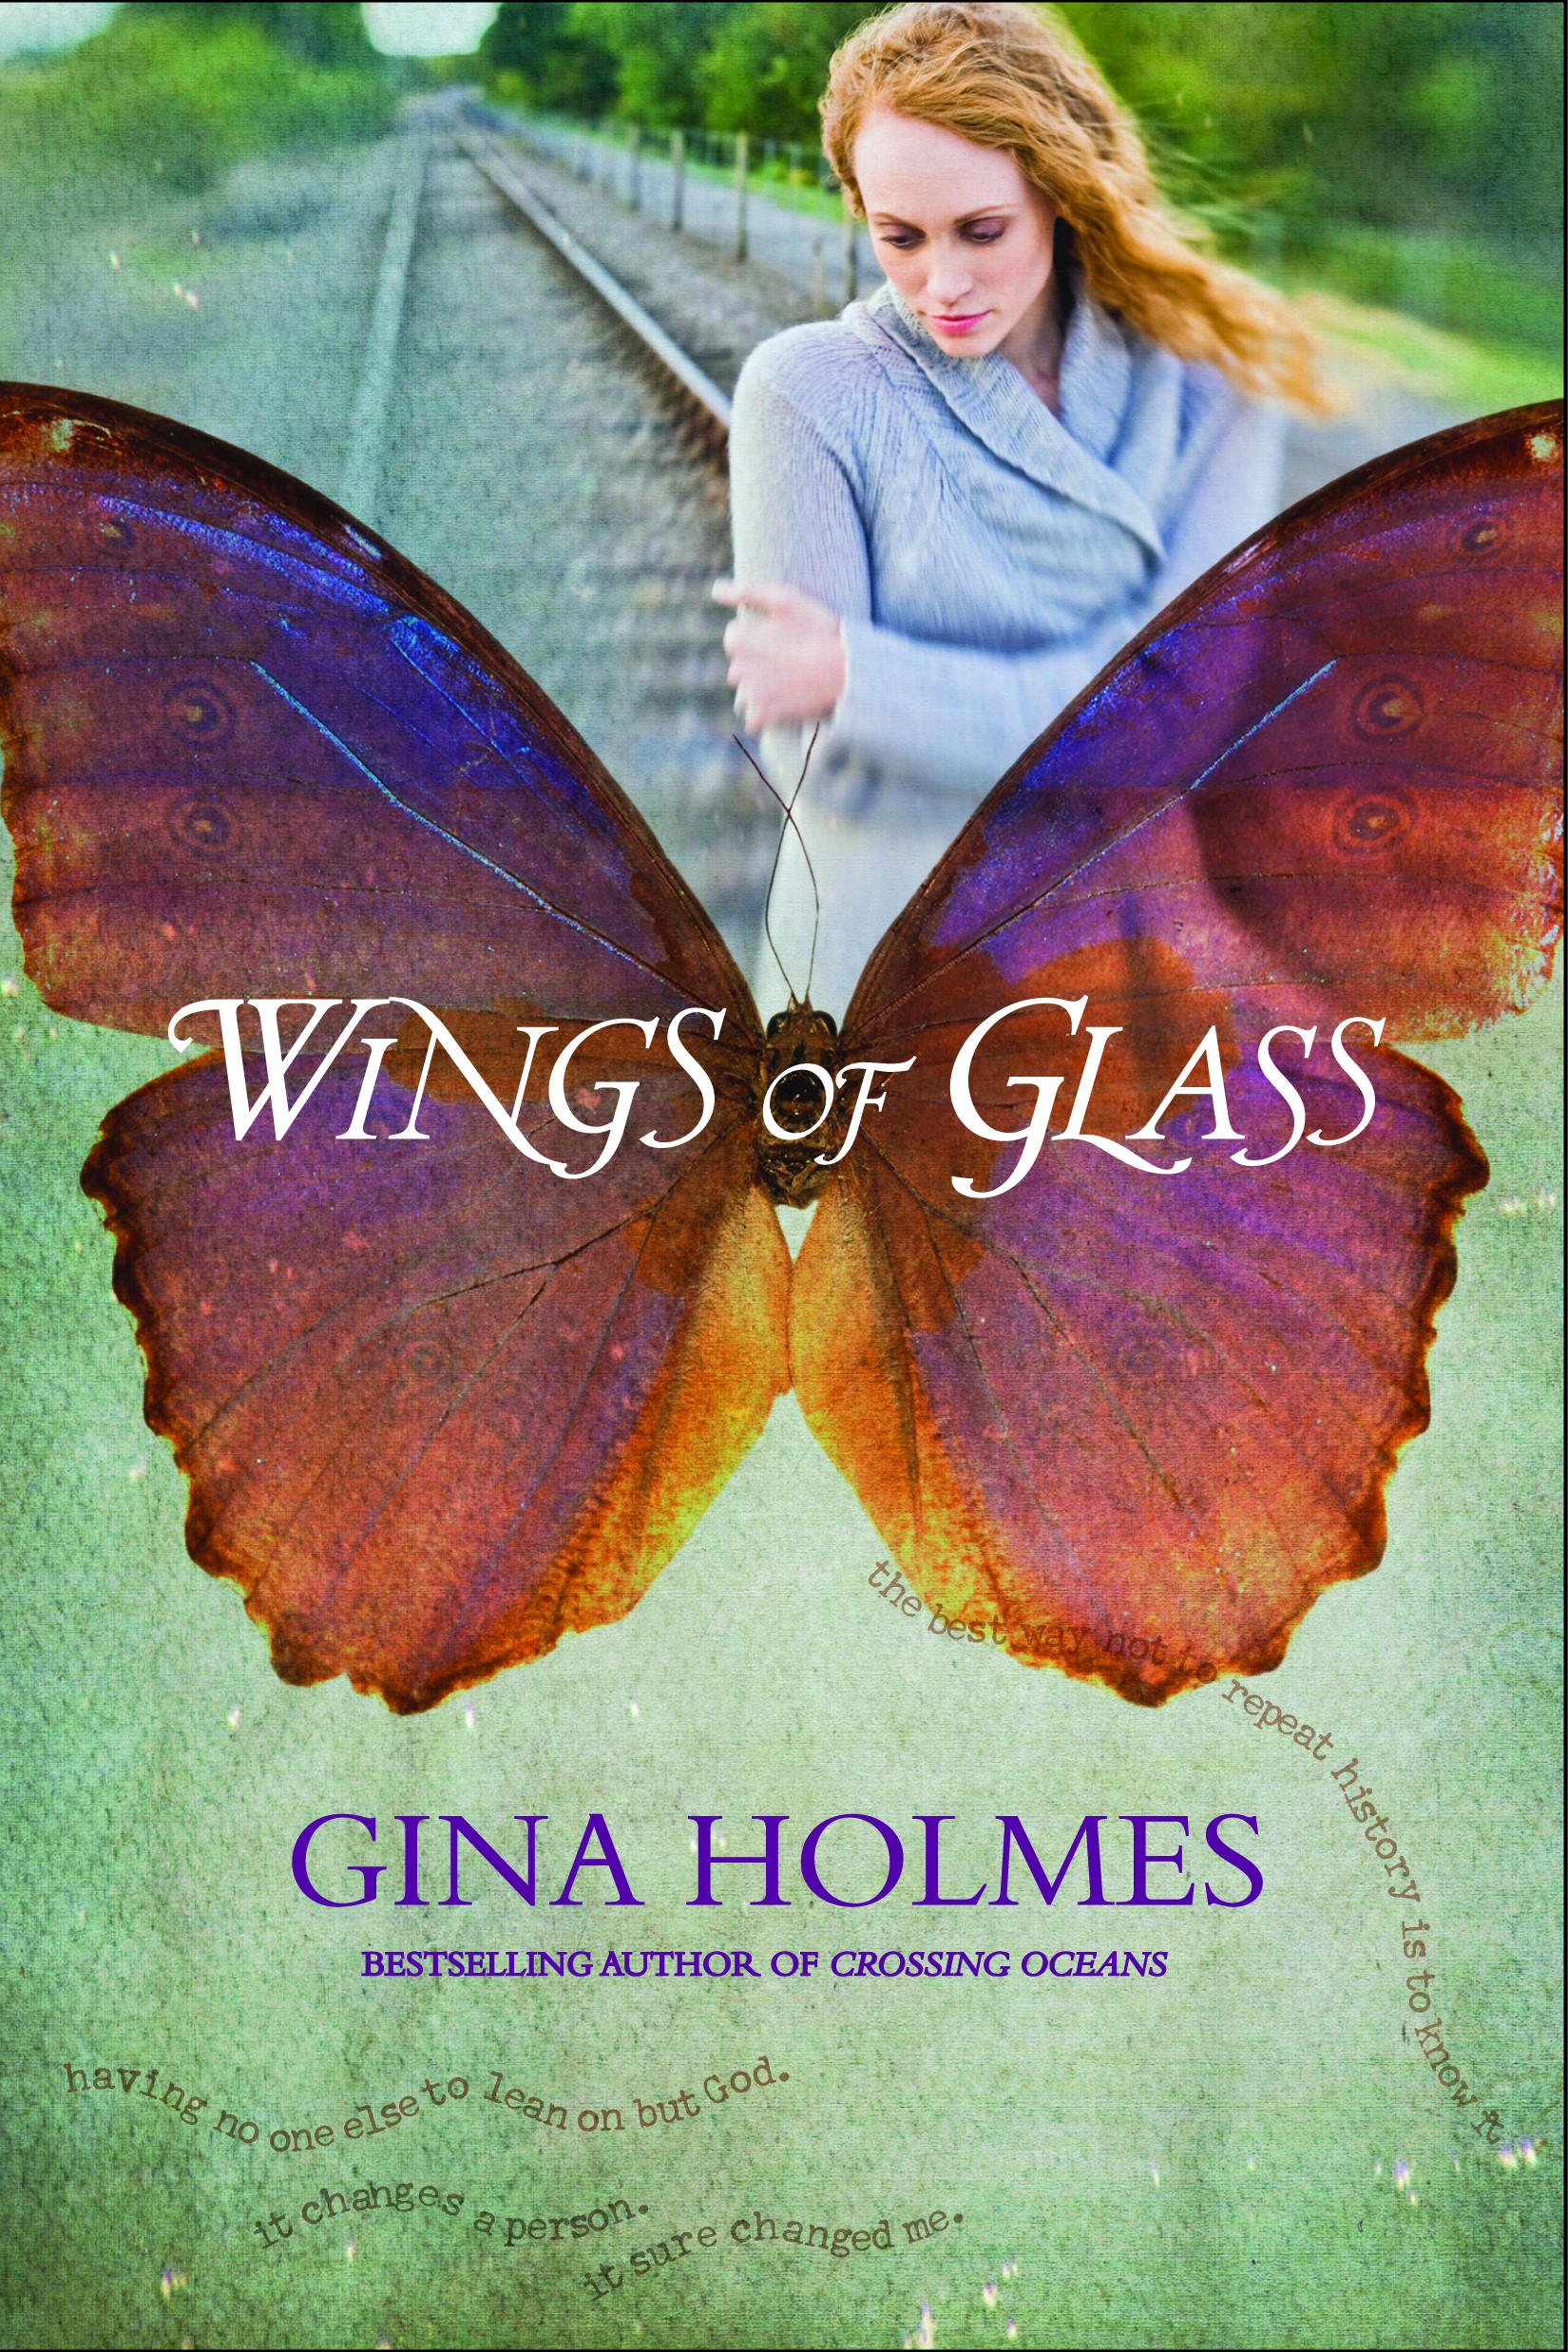 Wings of Glass by Gina Holmes